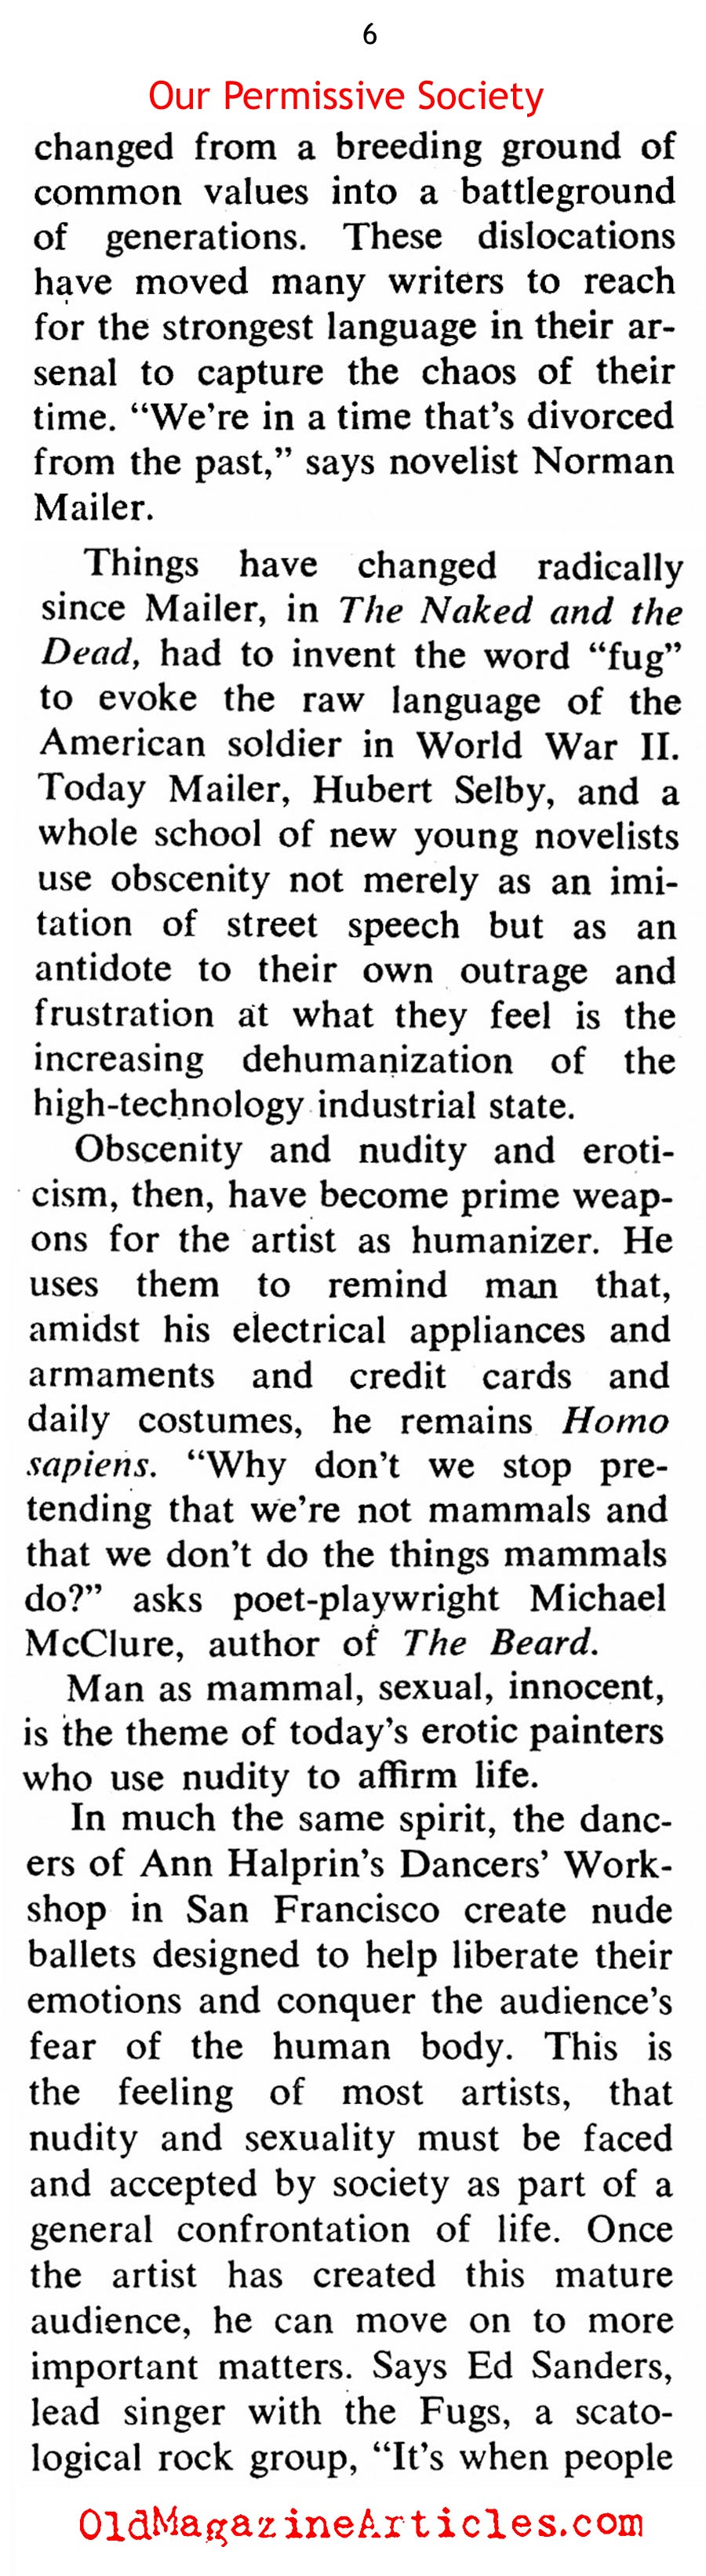 Nudity And Smut Becomes the Norm In American Pop-Culture (Coronet Magazine, 1968)